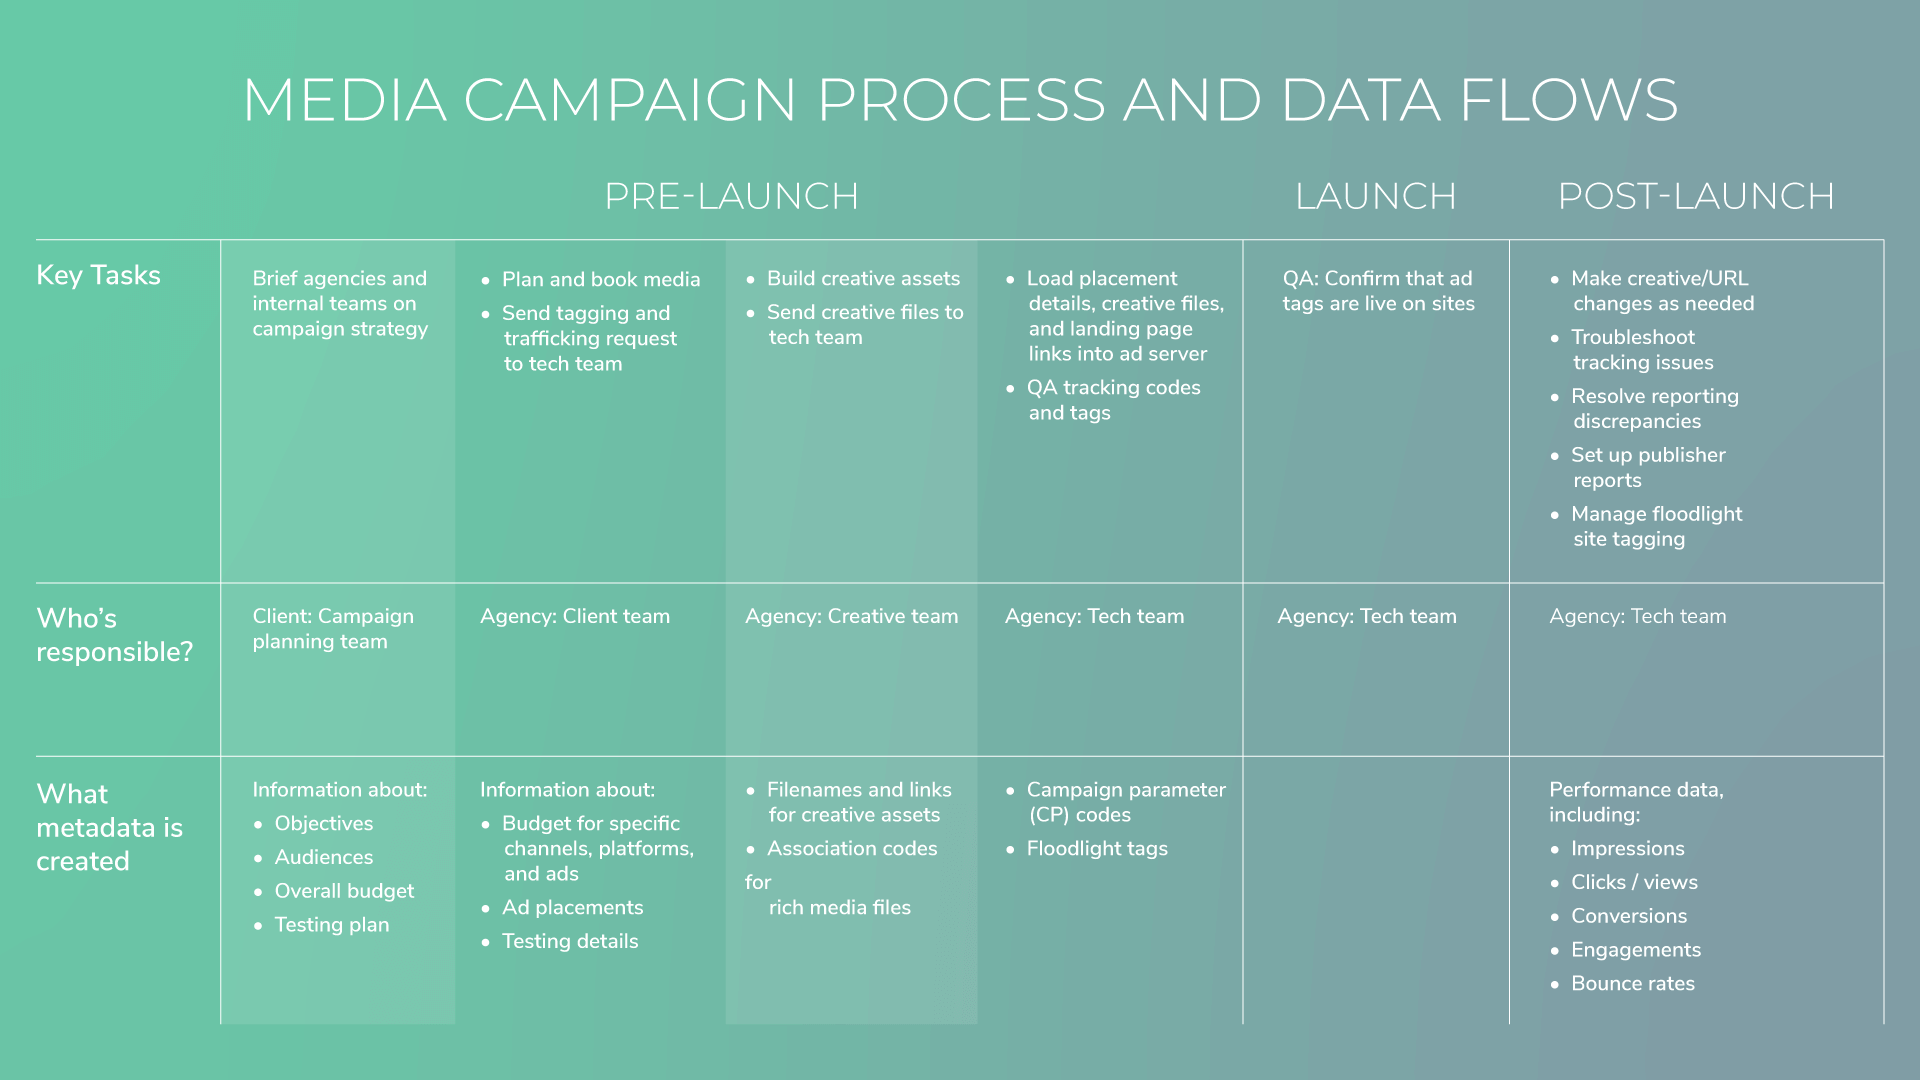 Media campaign process and data flows